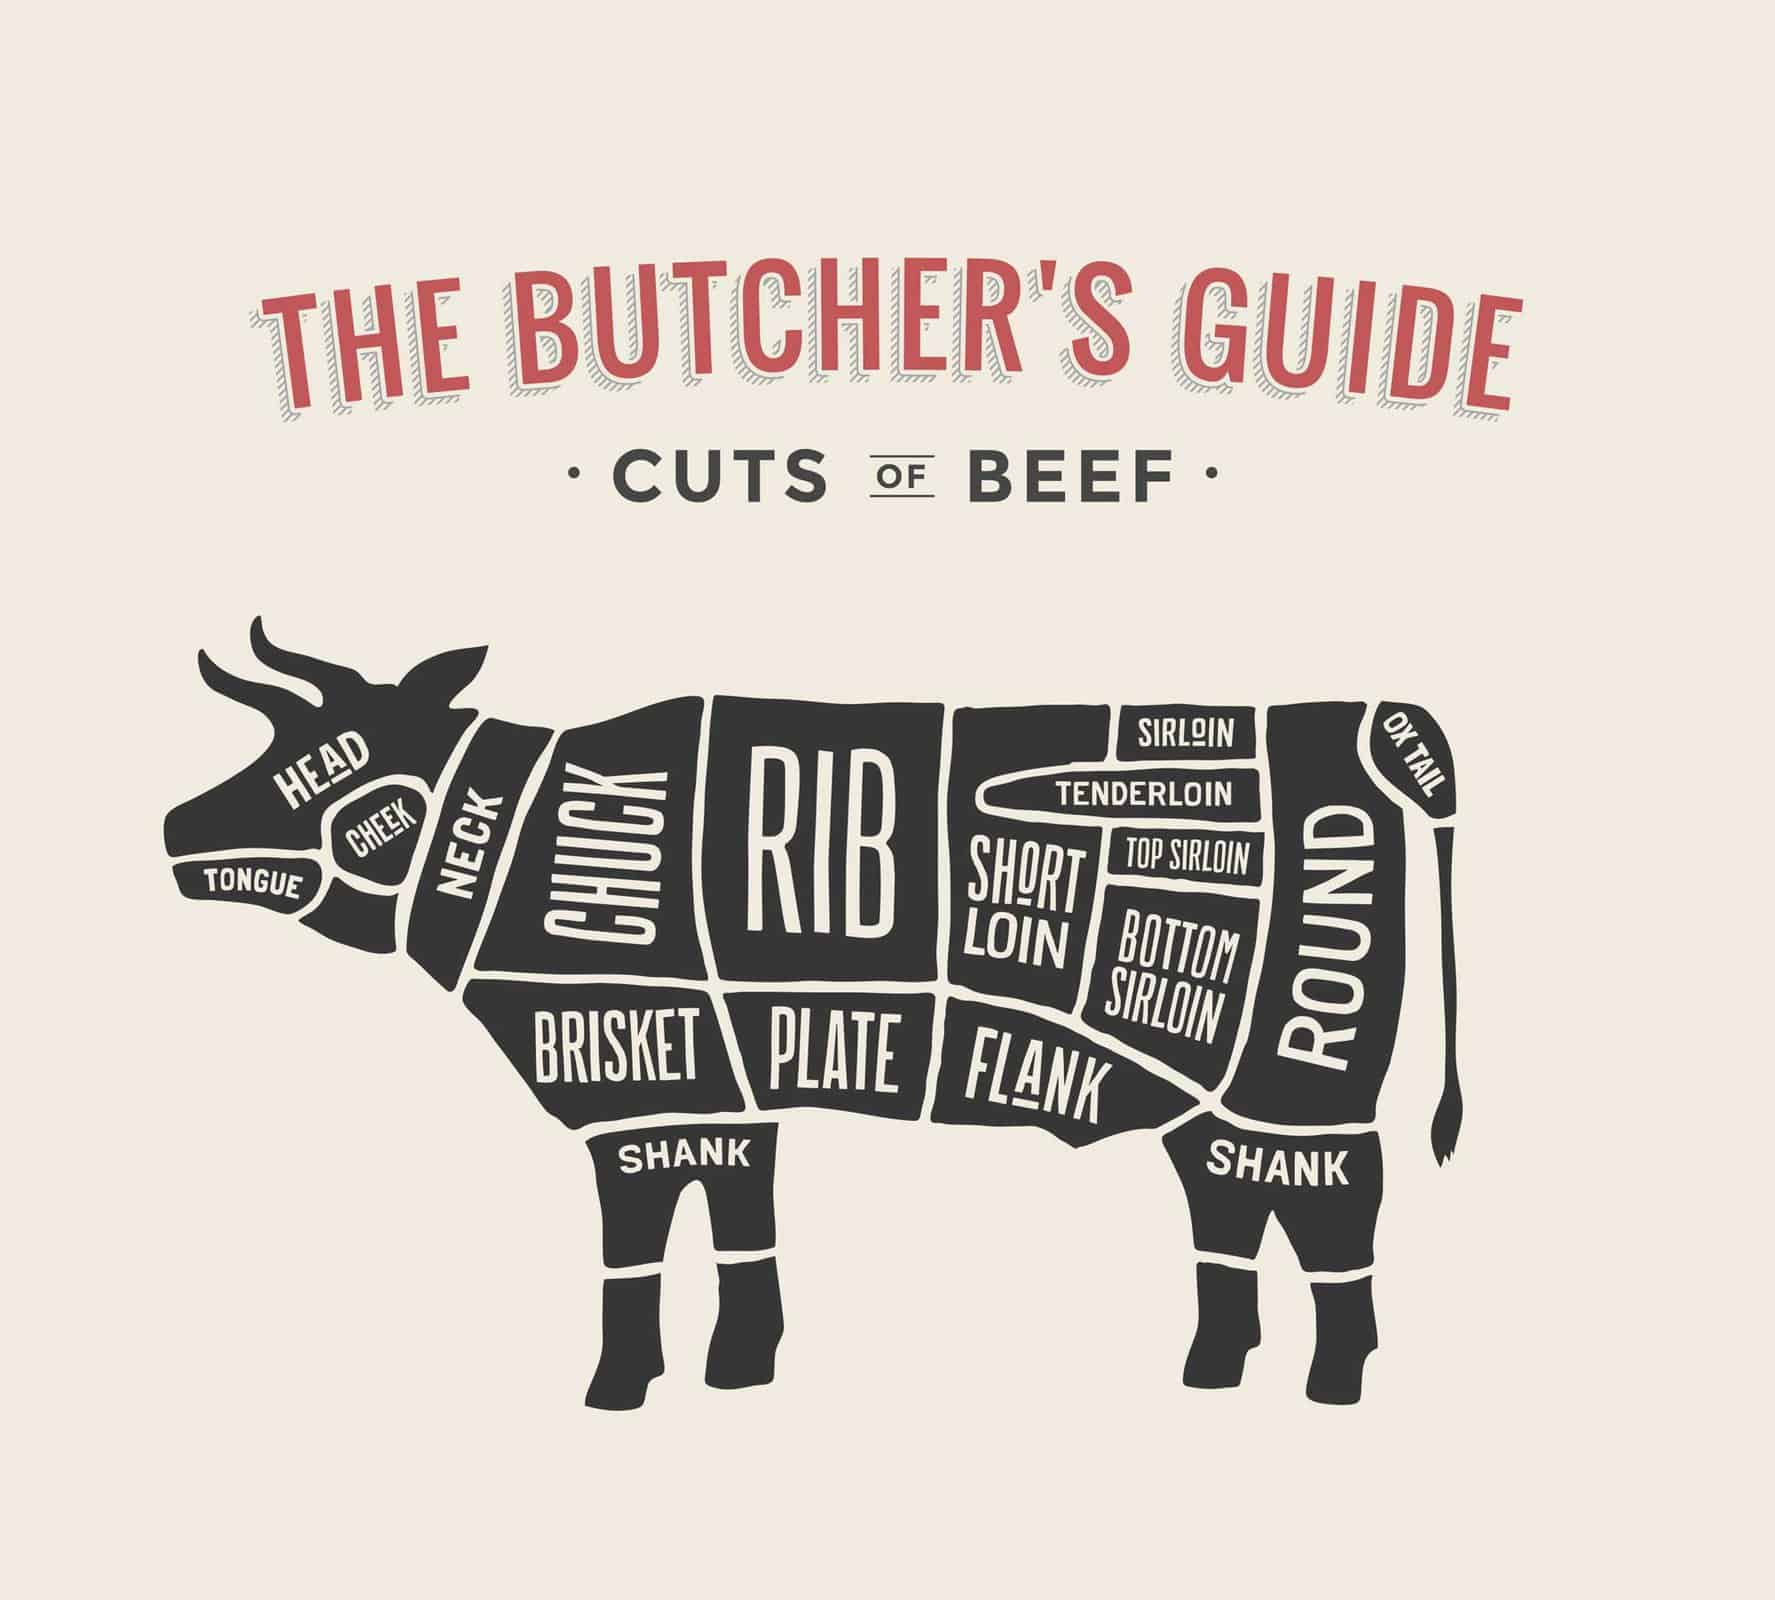 The Butchers Guide, Cuts of Beef Diagram